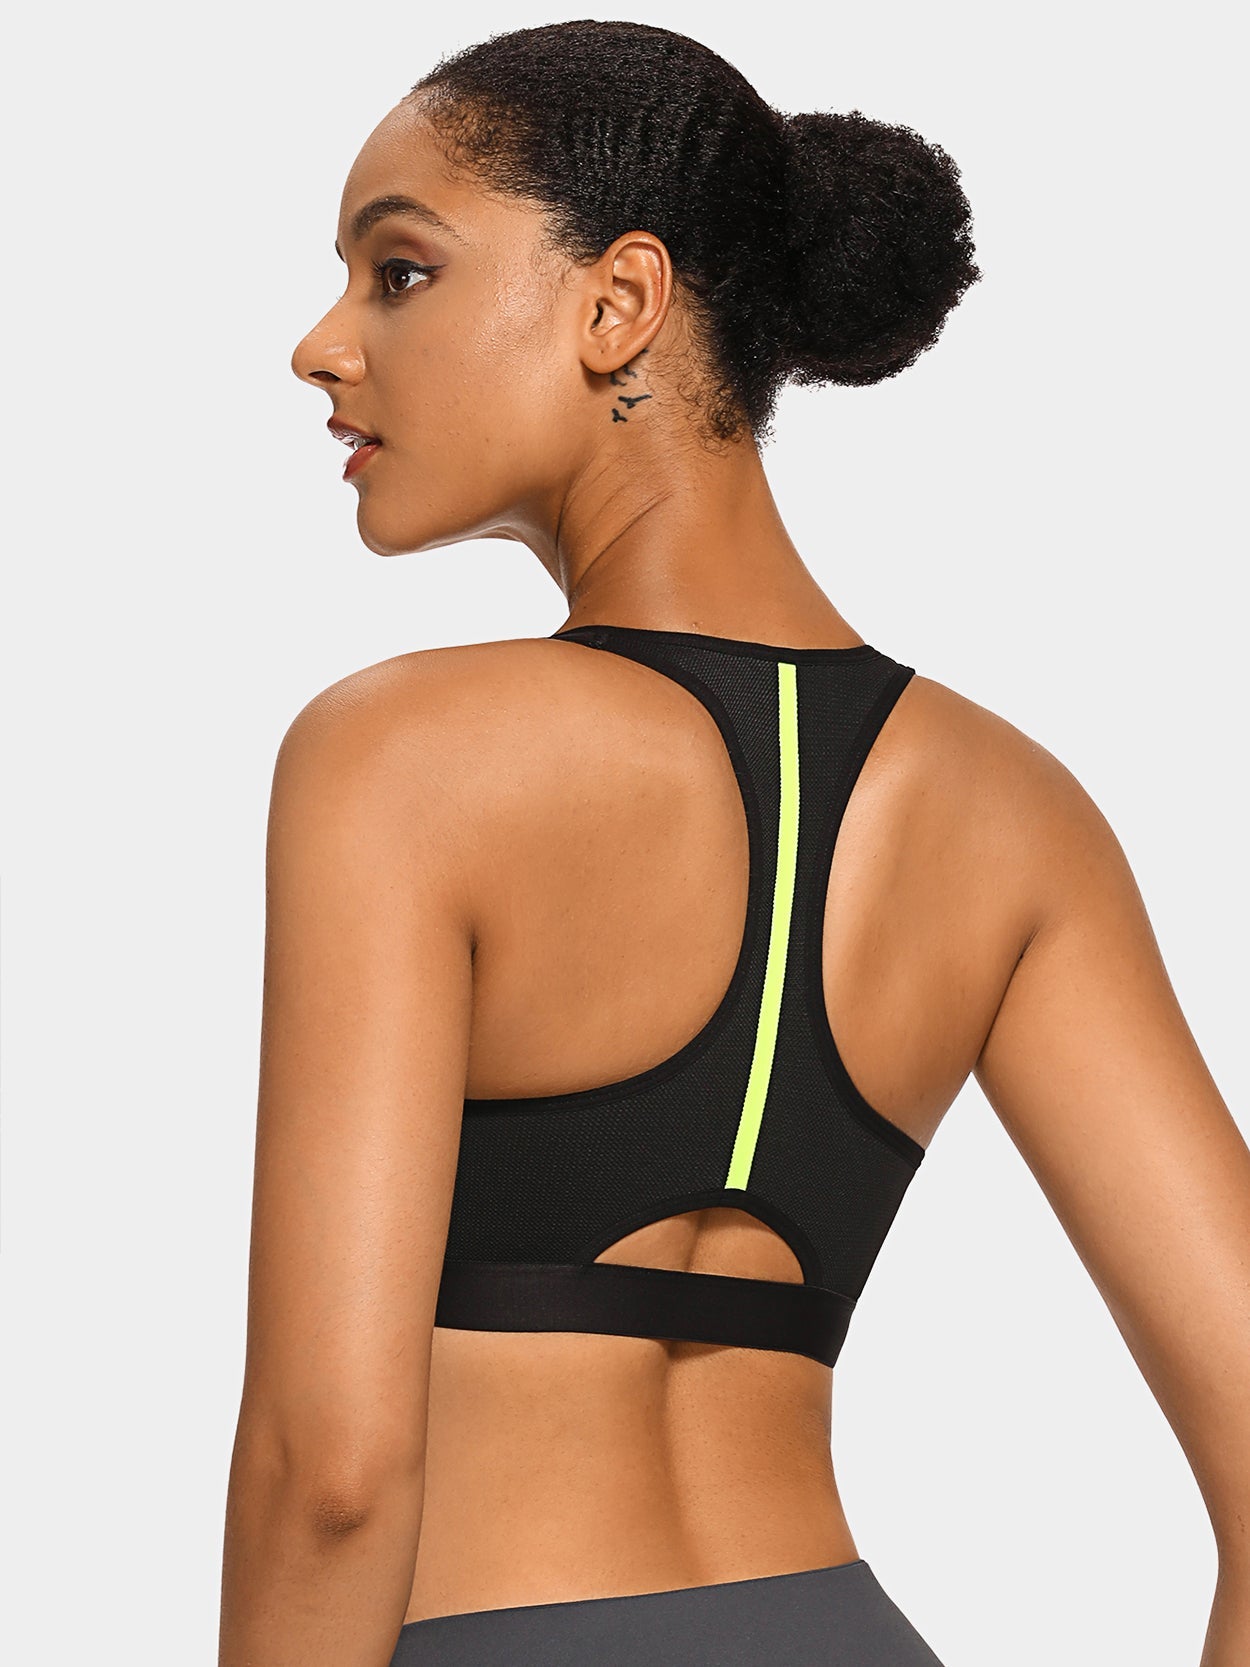 Gotoly Women Front Closure Sport Bras Full Coverage Bra Wirefree No Padding  Cross Back Support Tops with Zipper (Black Small)